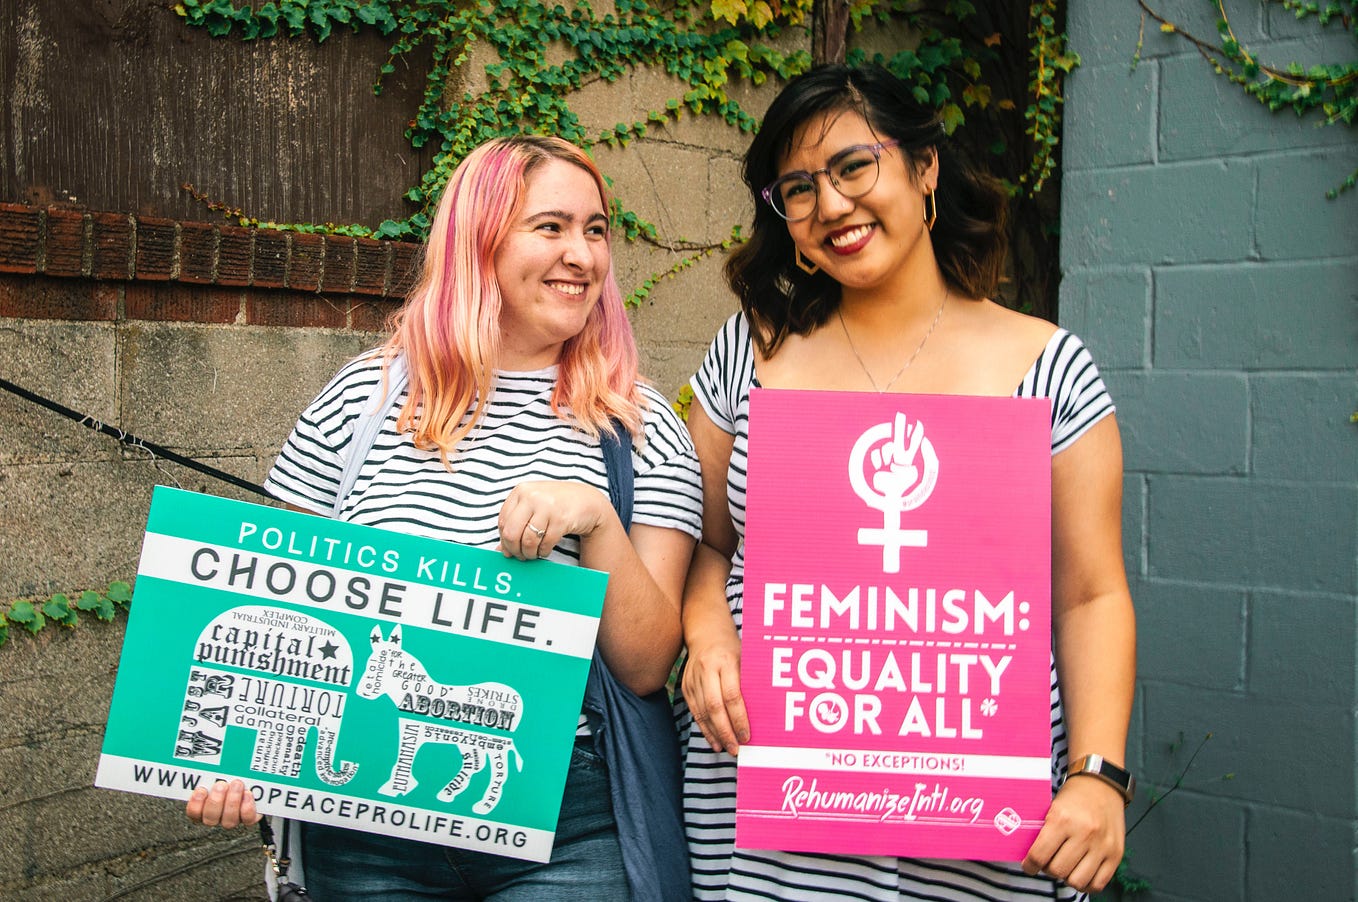 Image of two people, presumably women, holding signs supporting feminism and reproductive rights.